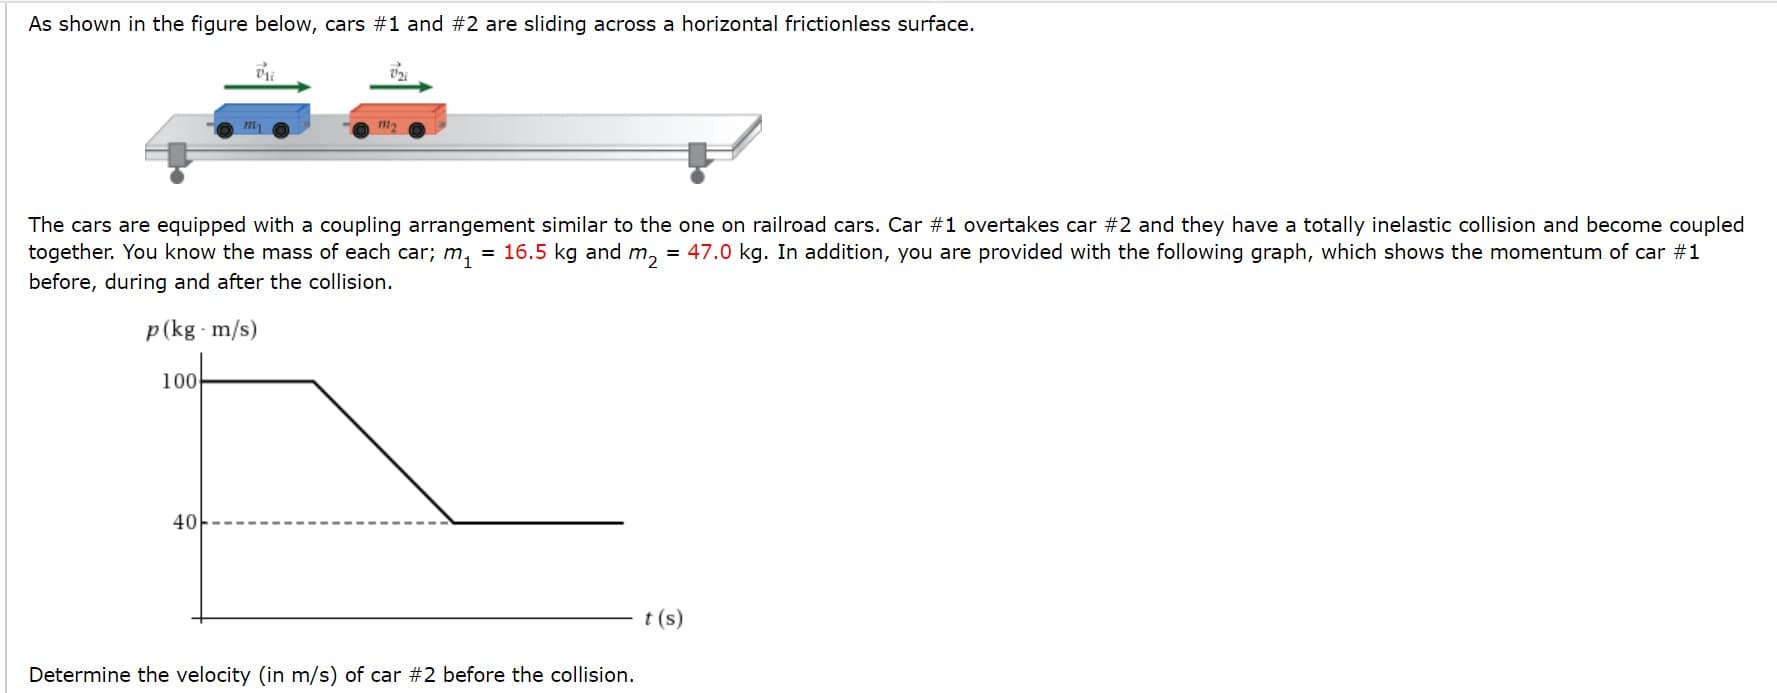 As shown in the figure below, cars #1 and #2 are sliding across a horizontal frictionless surface.
m2
my
The cars are equipped with a coupling arrangement similar to the one on railroad cars. Car #1 overtakes car #2 and they have a totally inelastic collision and become coupled
together. You know the mass of each car; m, = 16.5 kg and m, = 47.0 kg. In addition, you are provided with the following graph, which shows the momentum of car #1
before, during and after the collision.
p (kg m/s)
100
40
t (s)
Determine the velocity (in m/s) of car #2 before the collision.
